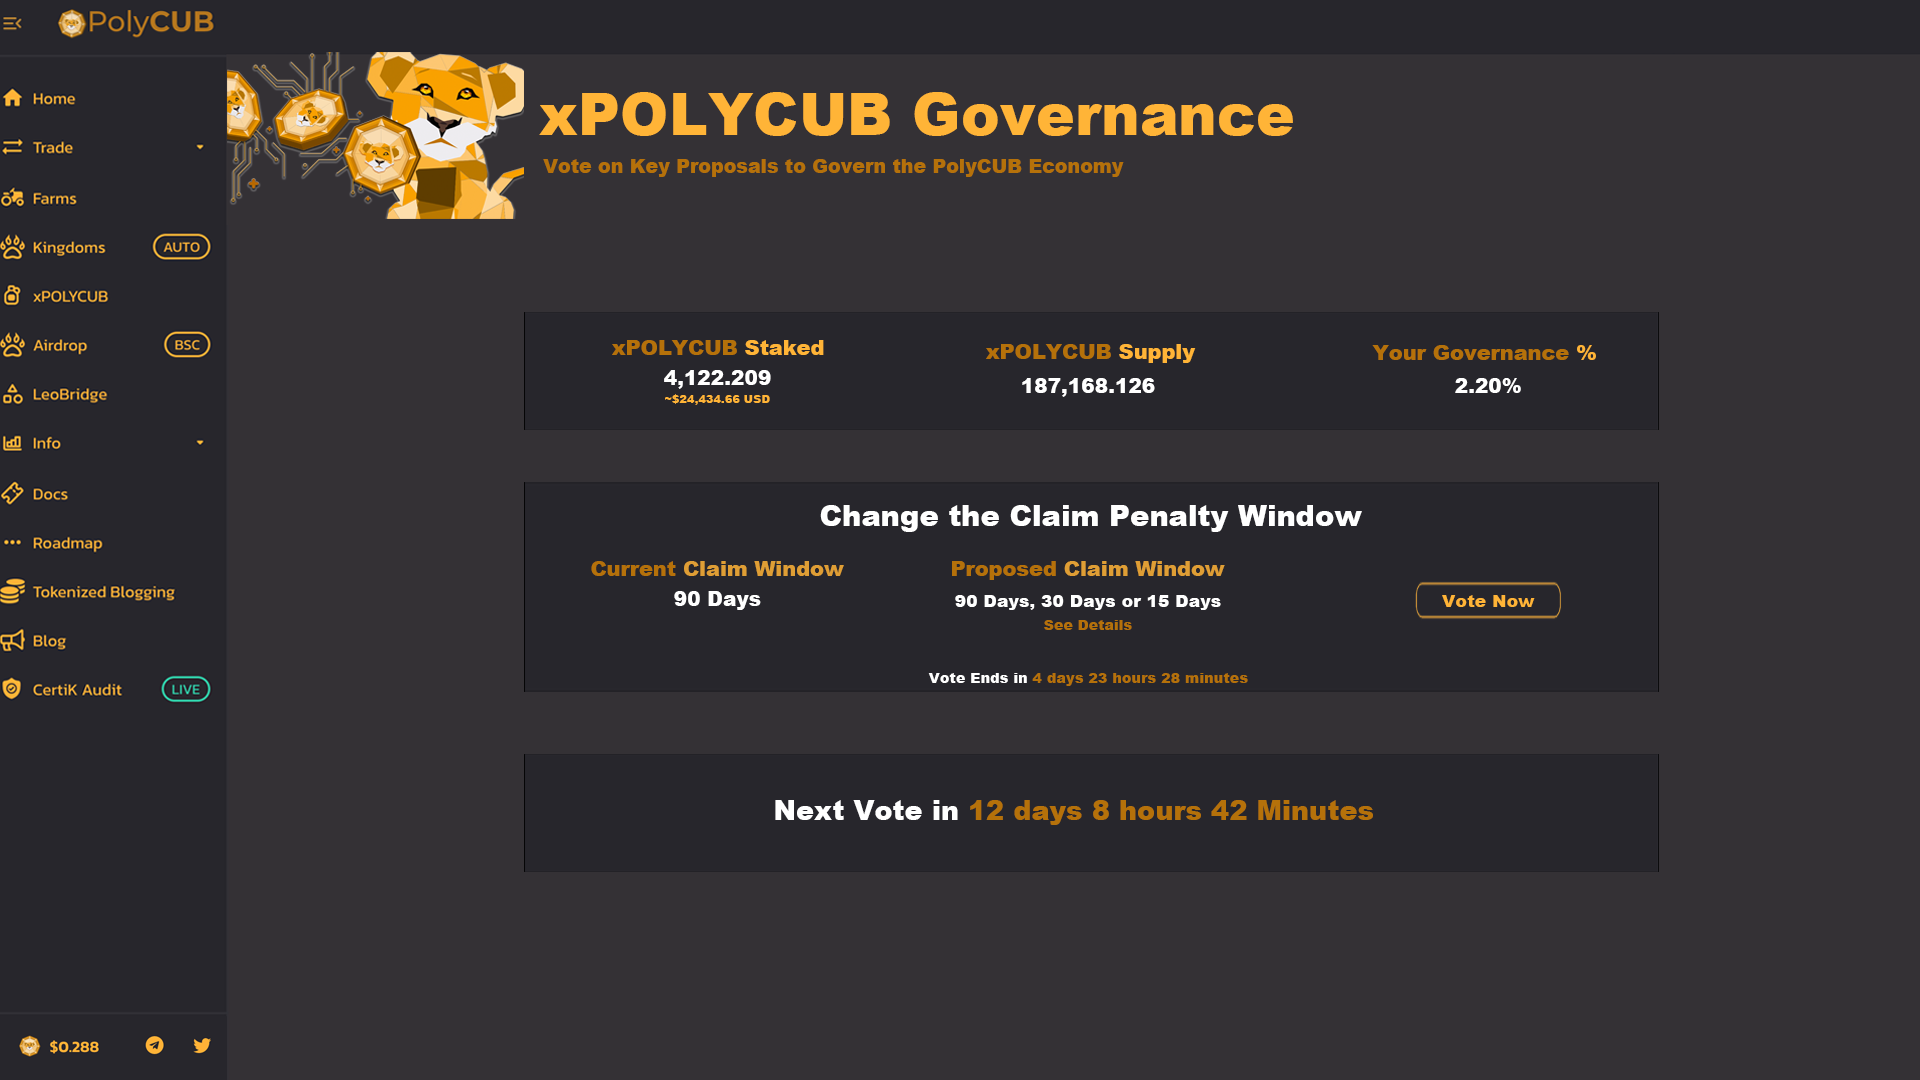 @leofinance/introducing-xpolycub-governance-or-first-vote-reduce-the-locked-claim-power-down-window